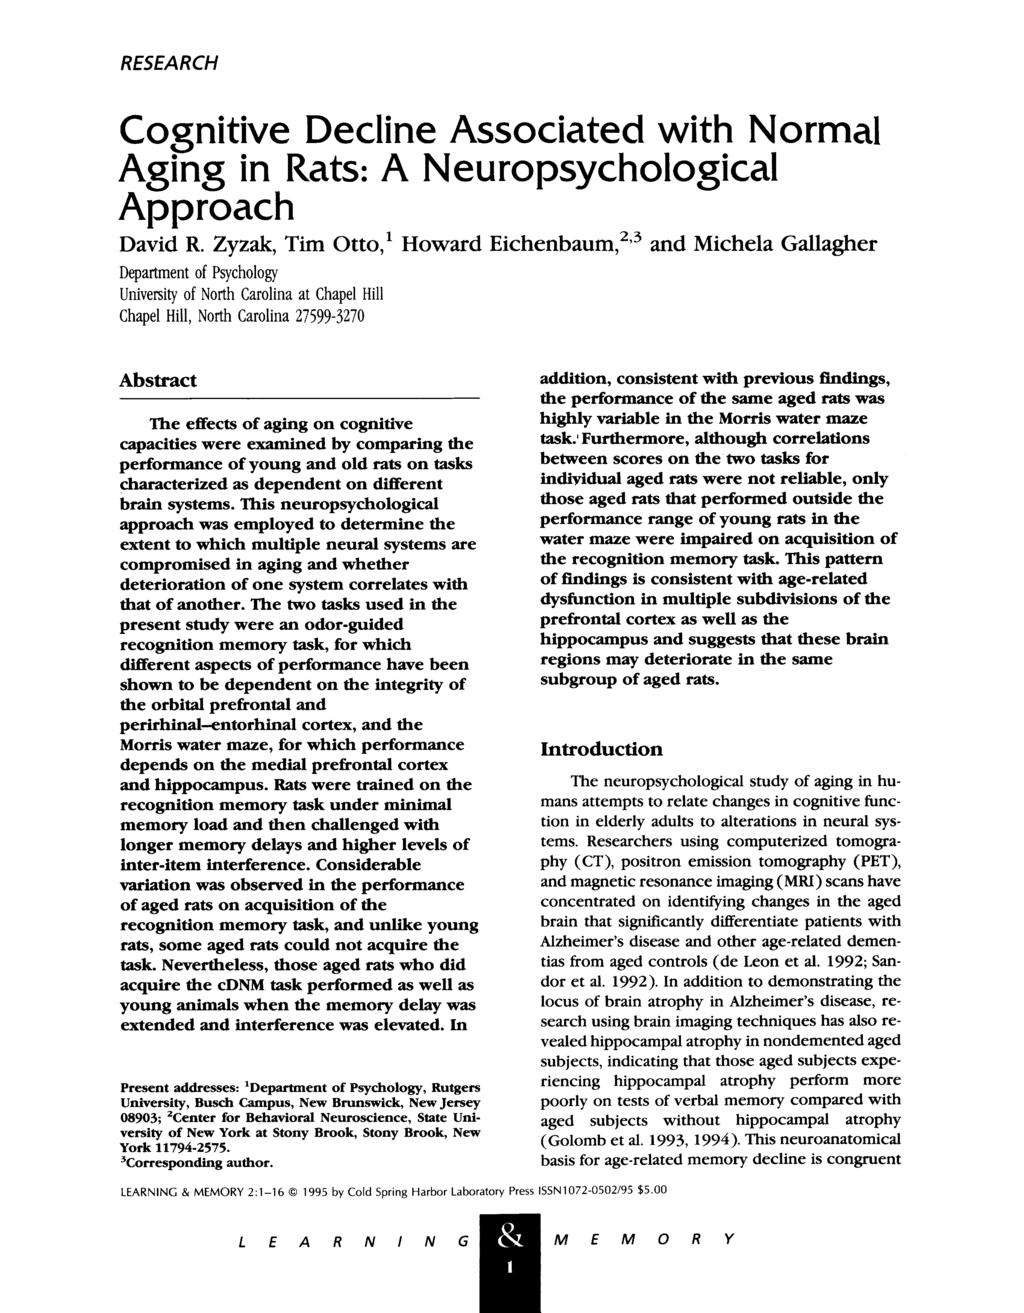 RESEARCH Cognitive Decline Associated with Normal Aging in Rats: A Neuropsychological Approach David R.